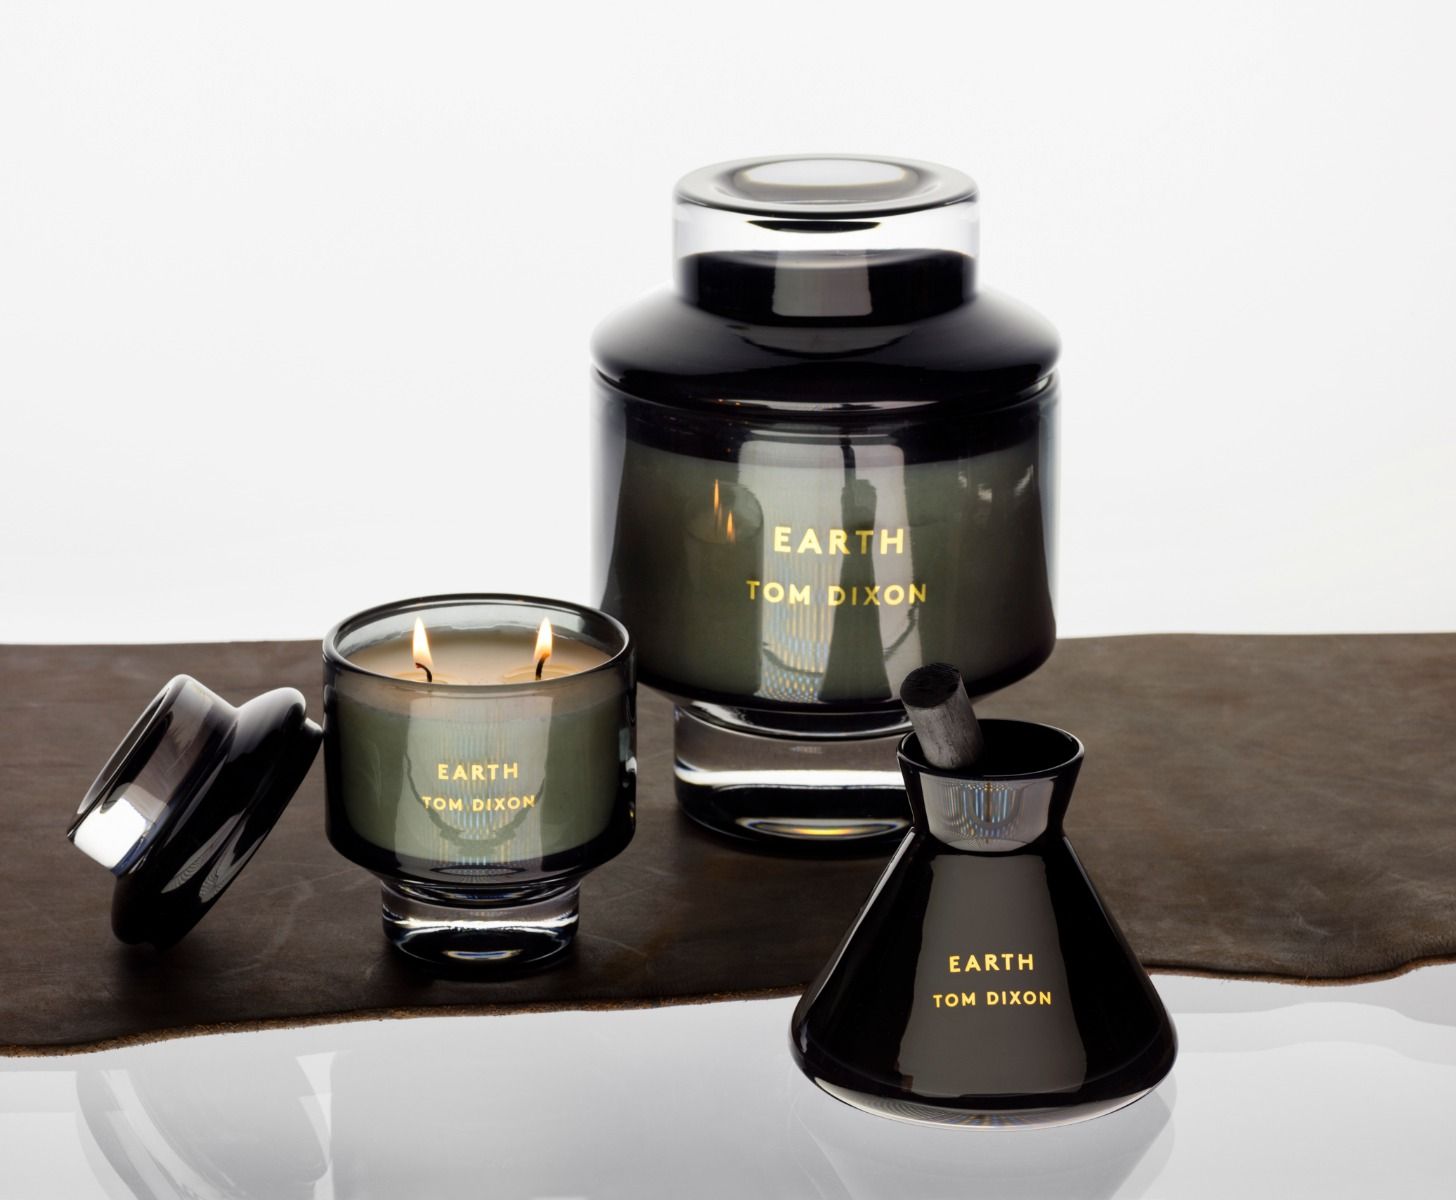 Father's Day Gifts - Gifts for Men - Tom Dixon Candle Elements Earth Scent - Gifts for Him - masculine candles - designer candles